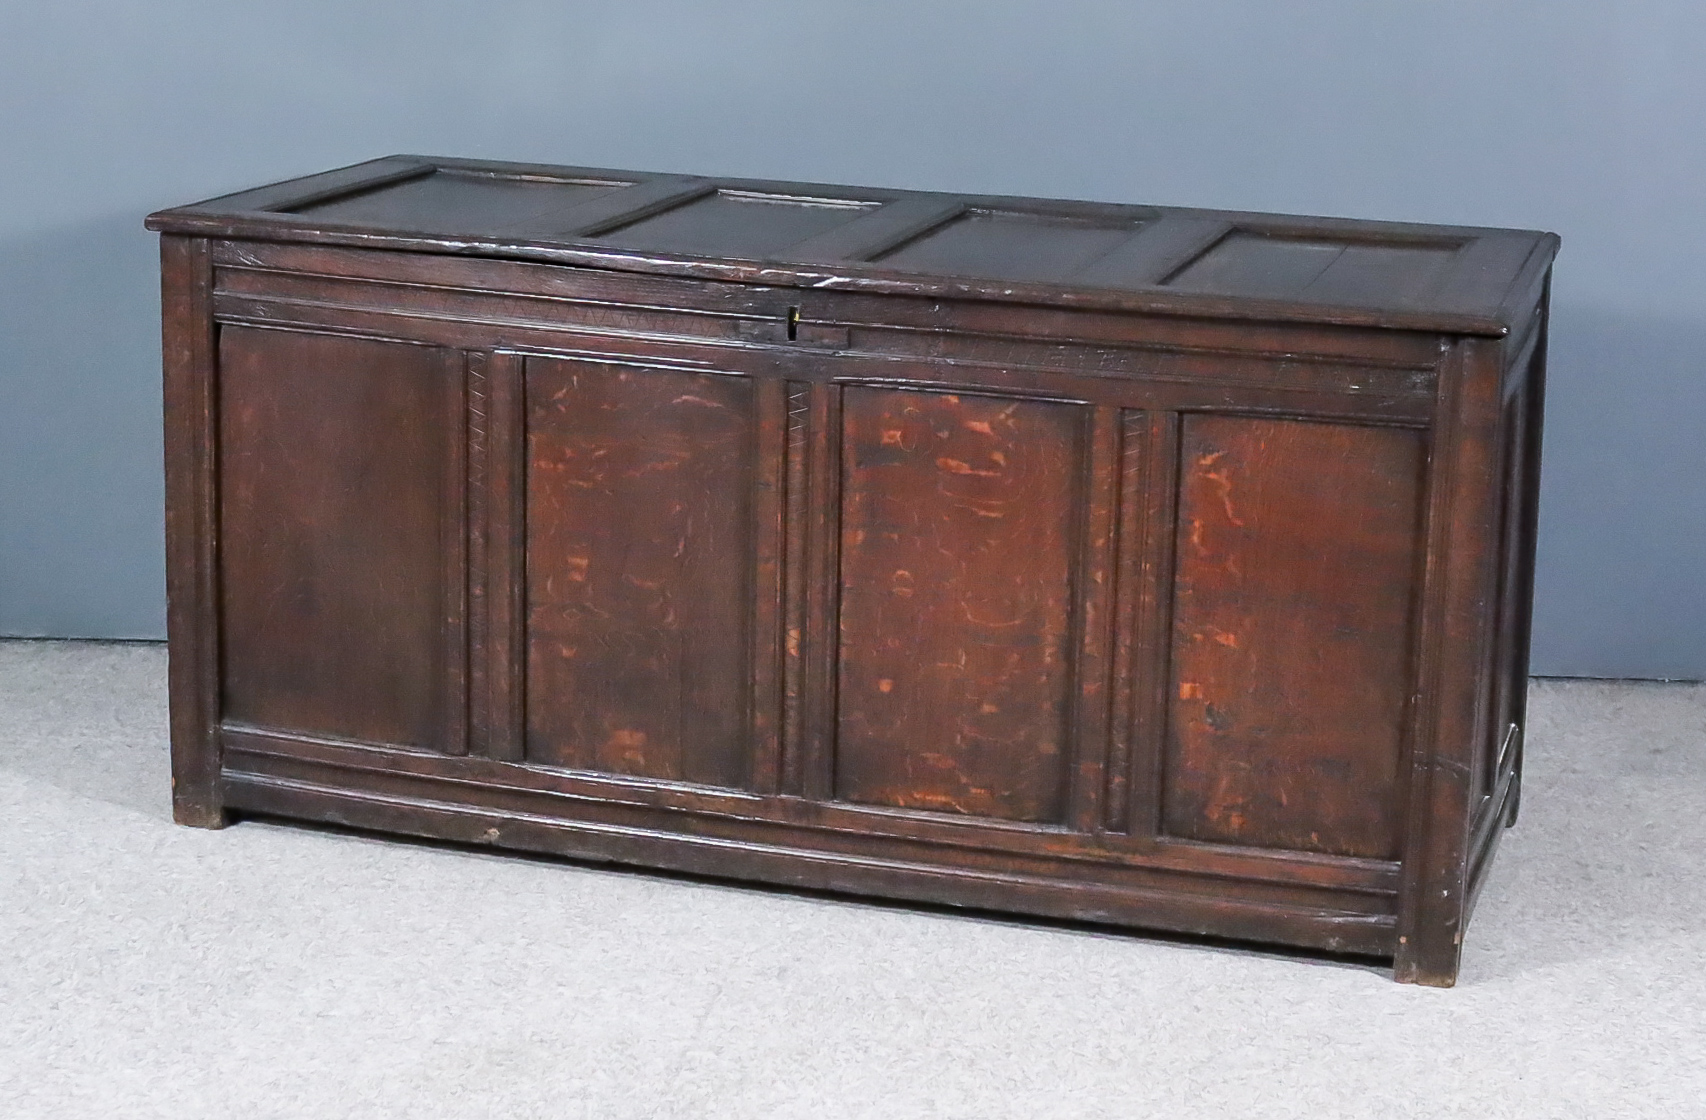 A Late 17th Century Panelled Oak Coffer, with four panelled lid and front, the whole with moulded